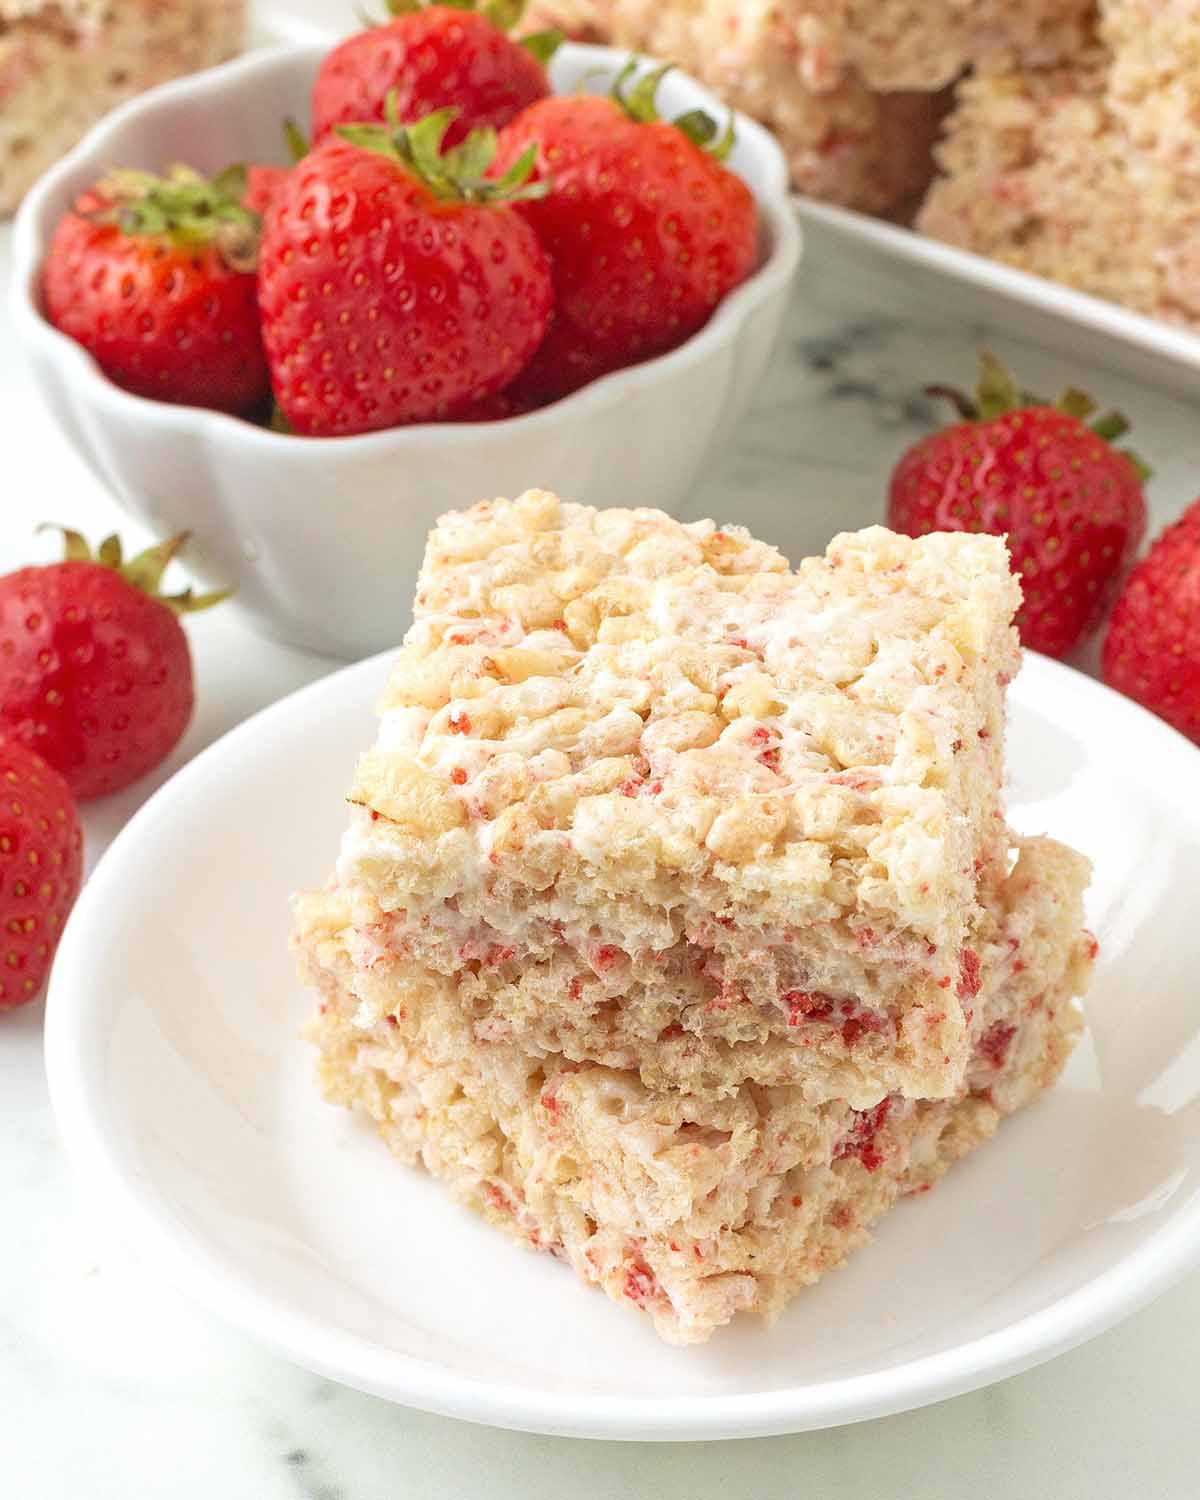 Two rice crispy treats on small plate, more treats and fresh strawberries sit in the background.